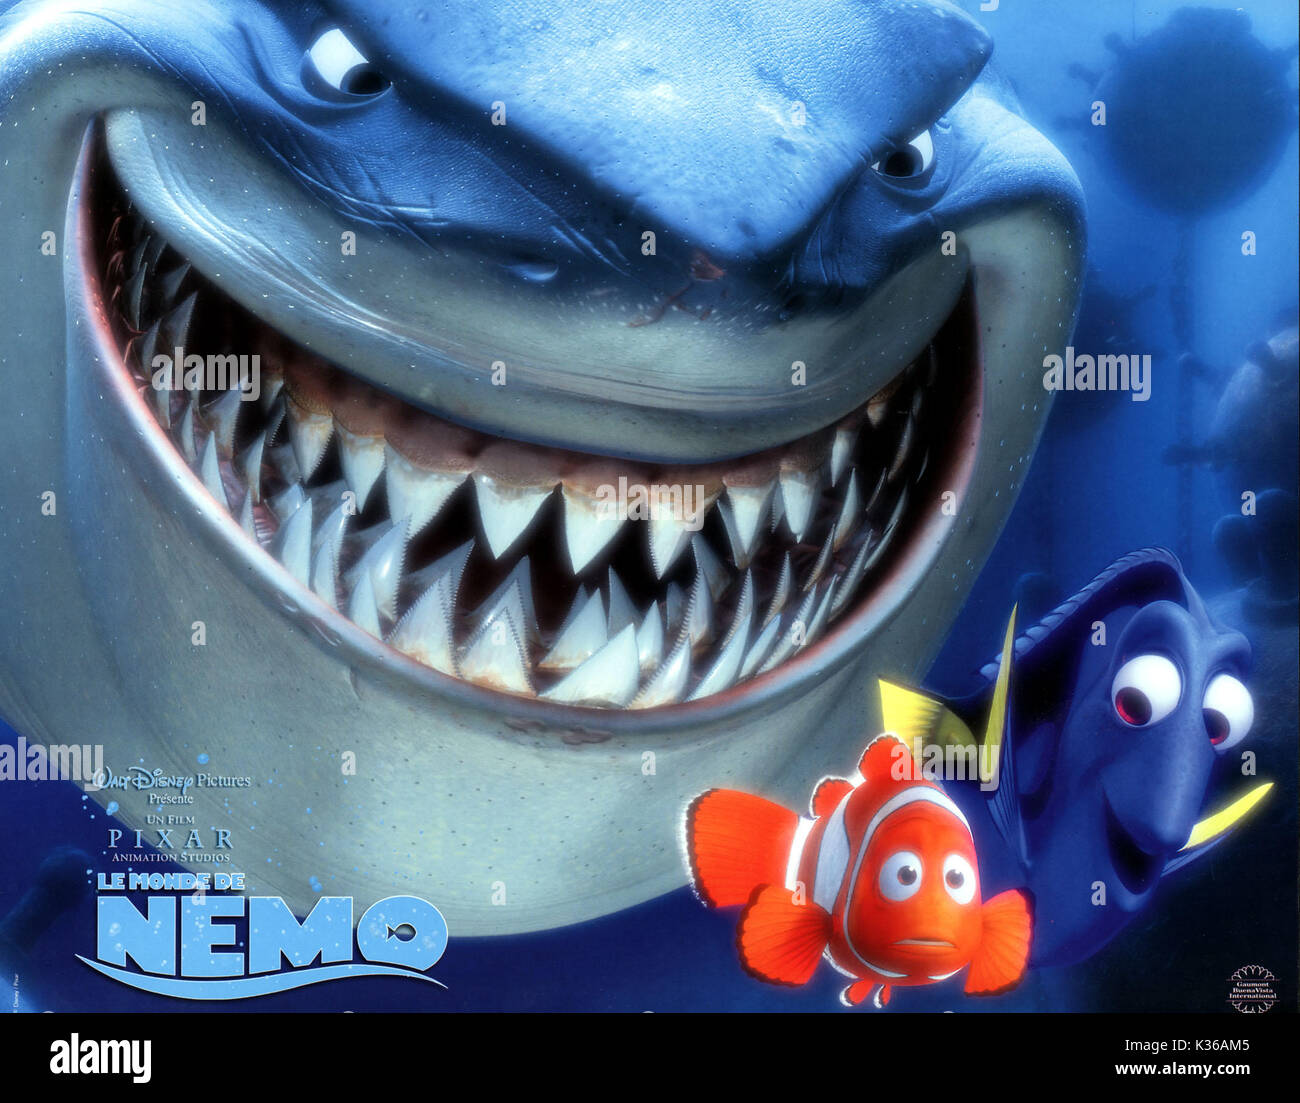 FINDING NEMO MARLIN AND DORY AMONGST THE SHARKS PLEASE CREDIT DISNEY/PIXAR     Date: 2003 Stock Photo